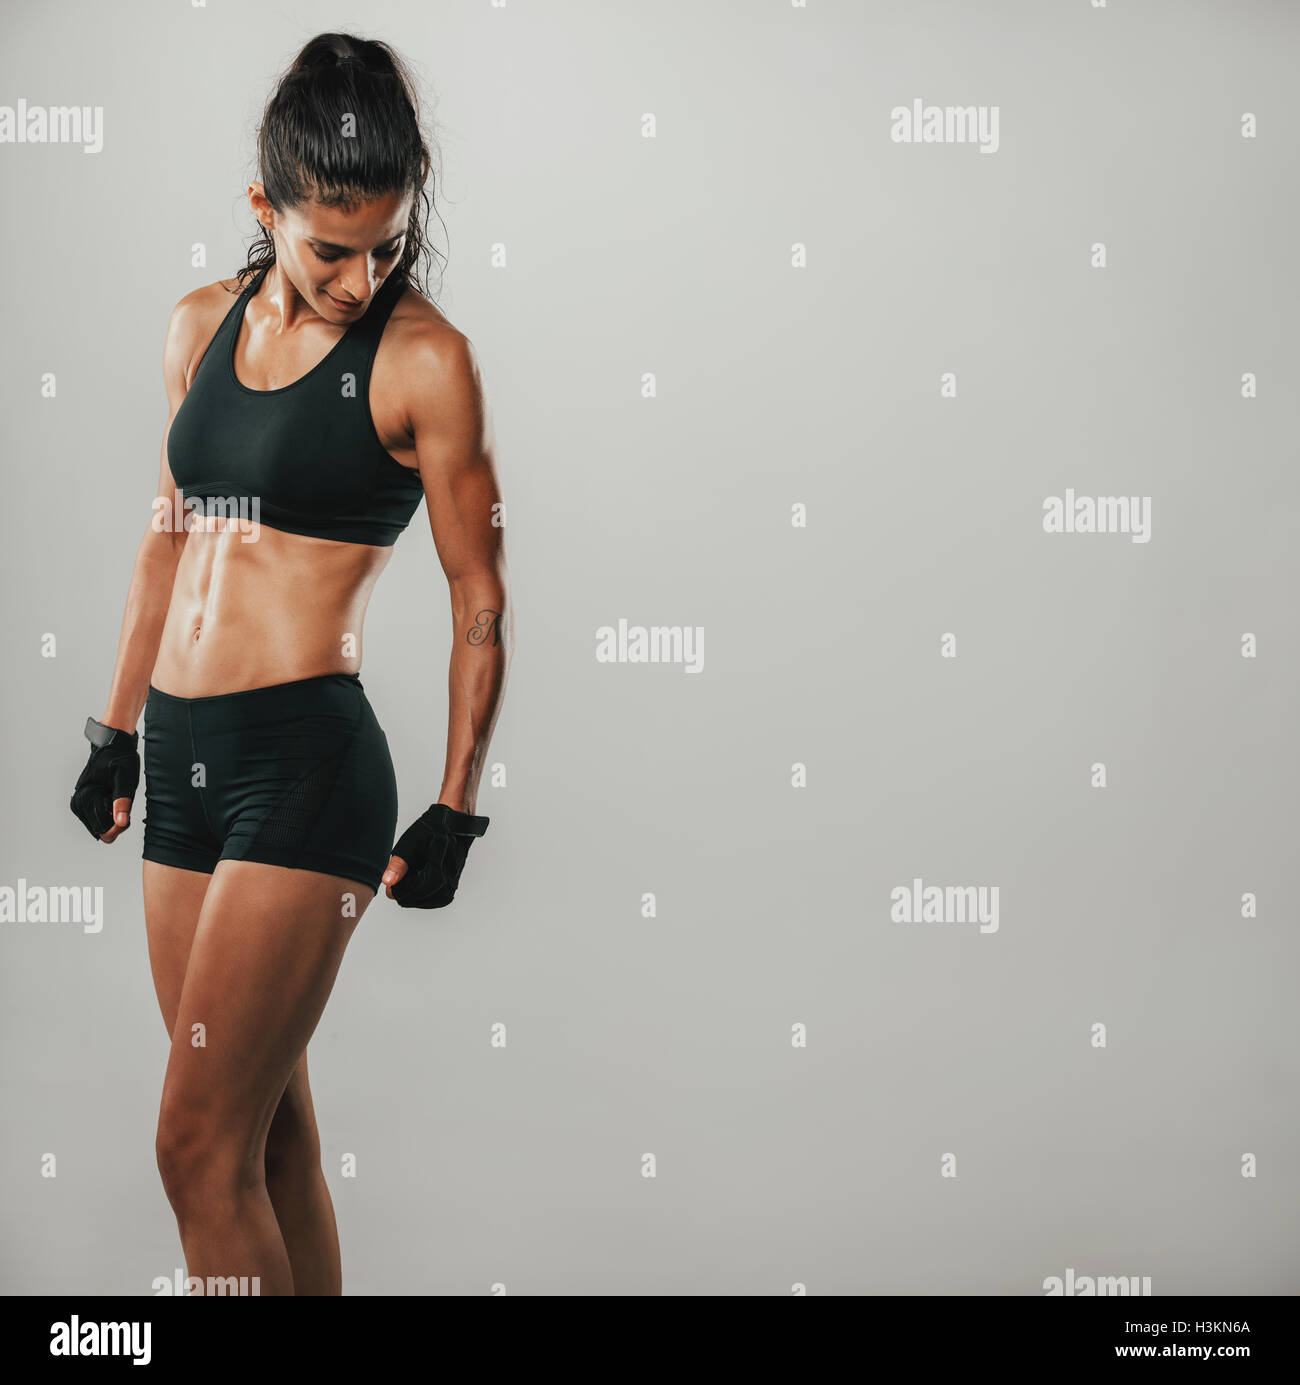 Muscular woman in black sports shorts and top looks down while standing in a grey room Stock Photo